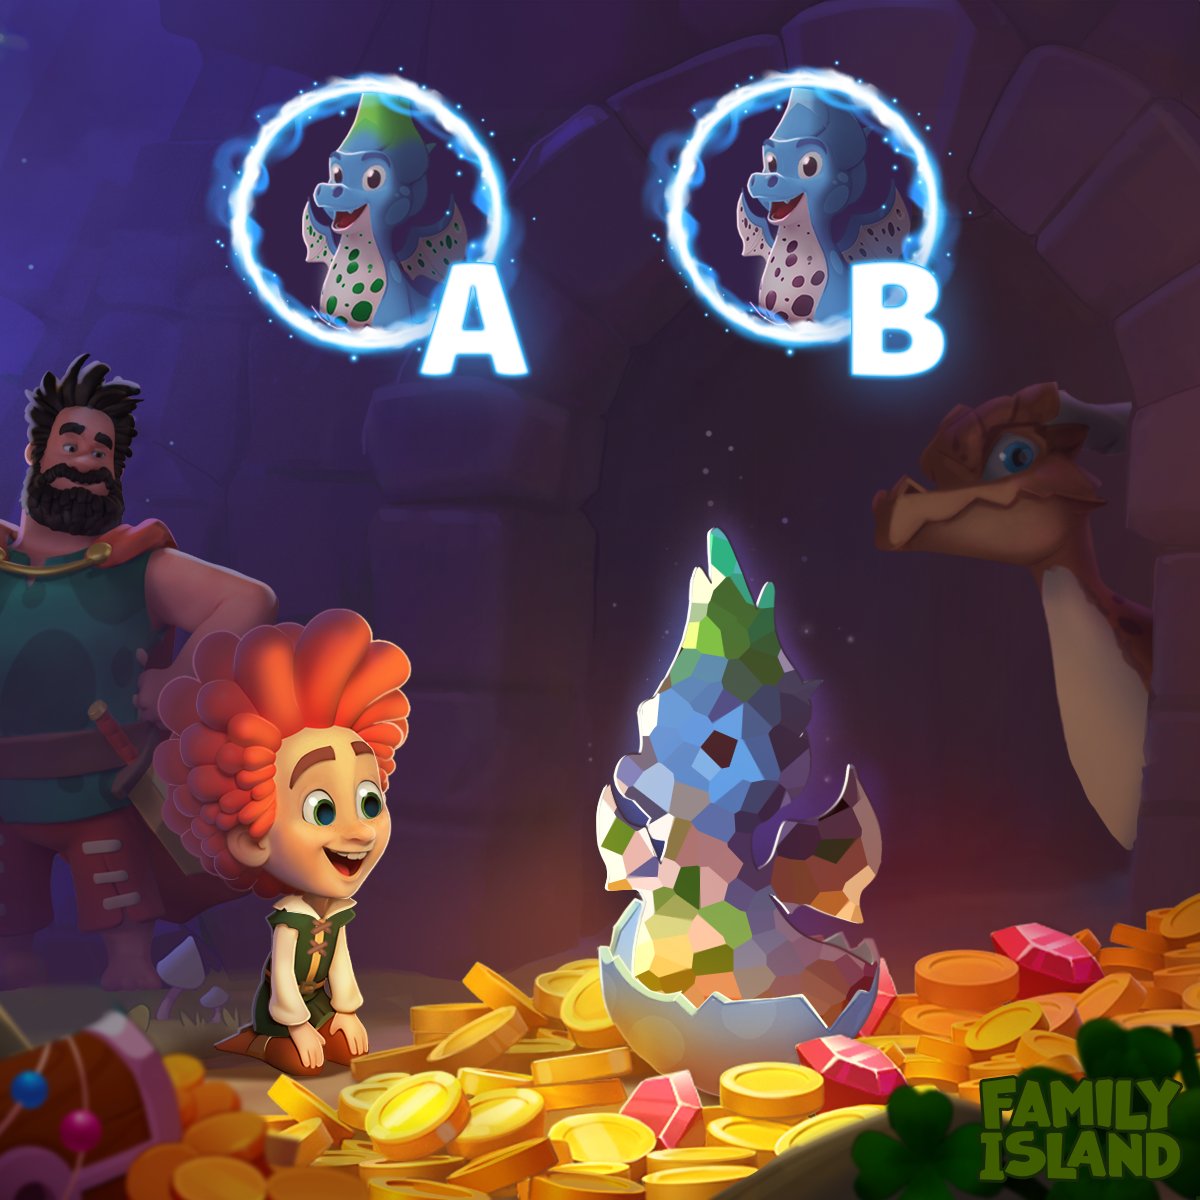 The great adventures have discovered something fantastical in the cave…🐉 But can you guess which little dragon they’ve found? 🤔 Drop your answer and Support ID below for a chance to WIN the treasure – 𝟏,𝟓𝟎𝟎 𝐄𝐧𝐞𝐫𝐠𝐲 𝐚𝐧𝐝 𝟏 𝐆𝐨𝐥𝐝 𝐒𝐚𝐰🤩